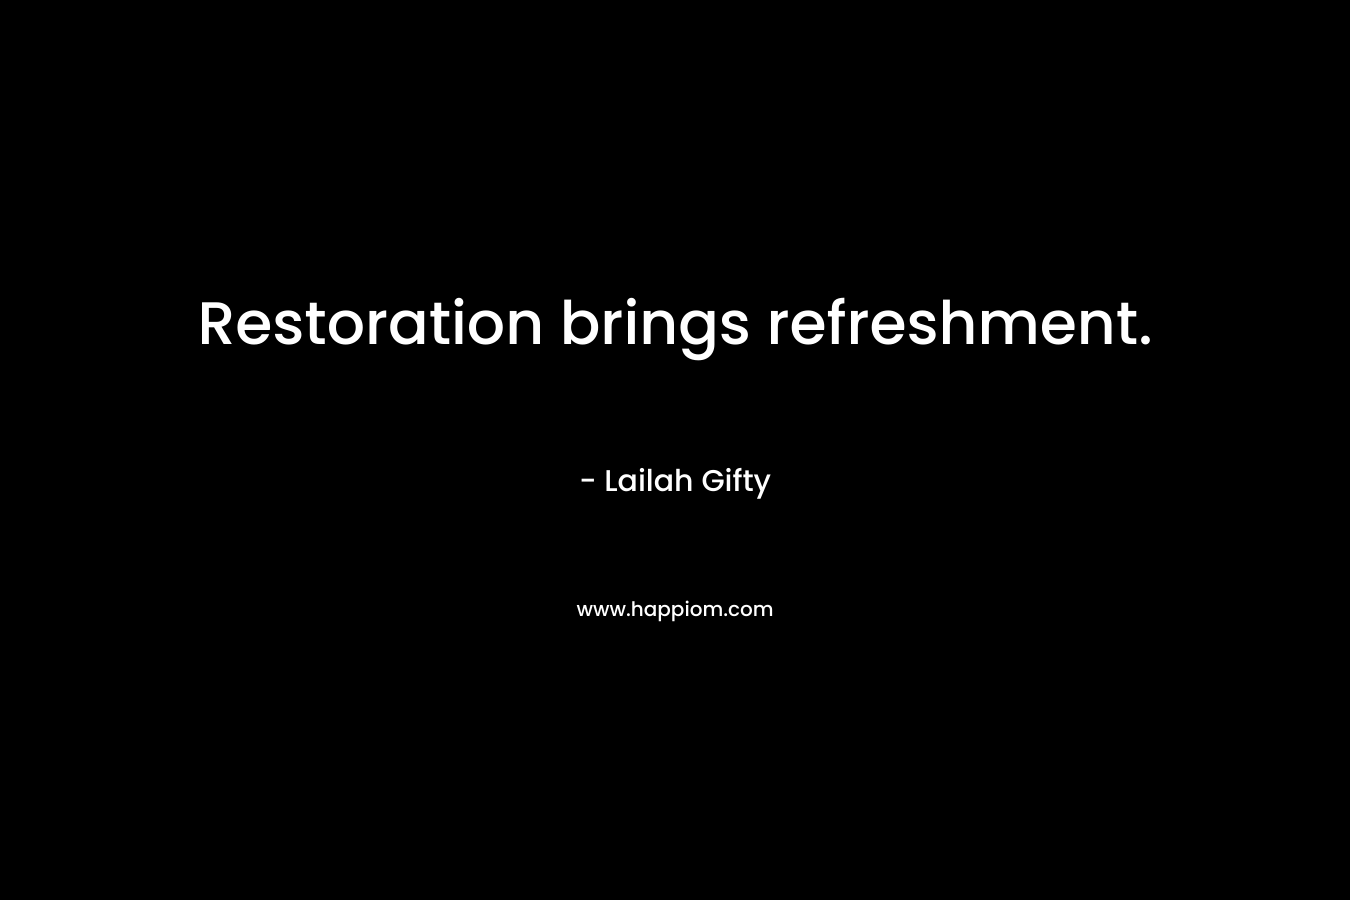 Restoration brings refreshment. – Lailah Gifty